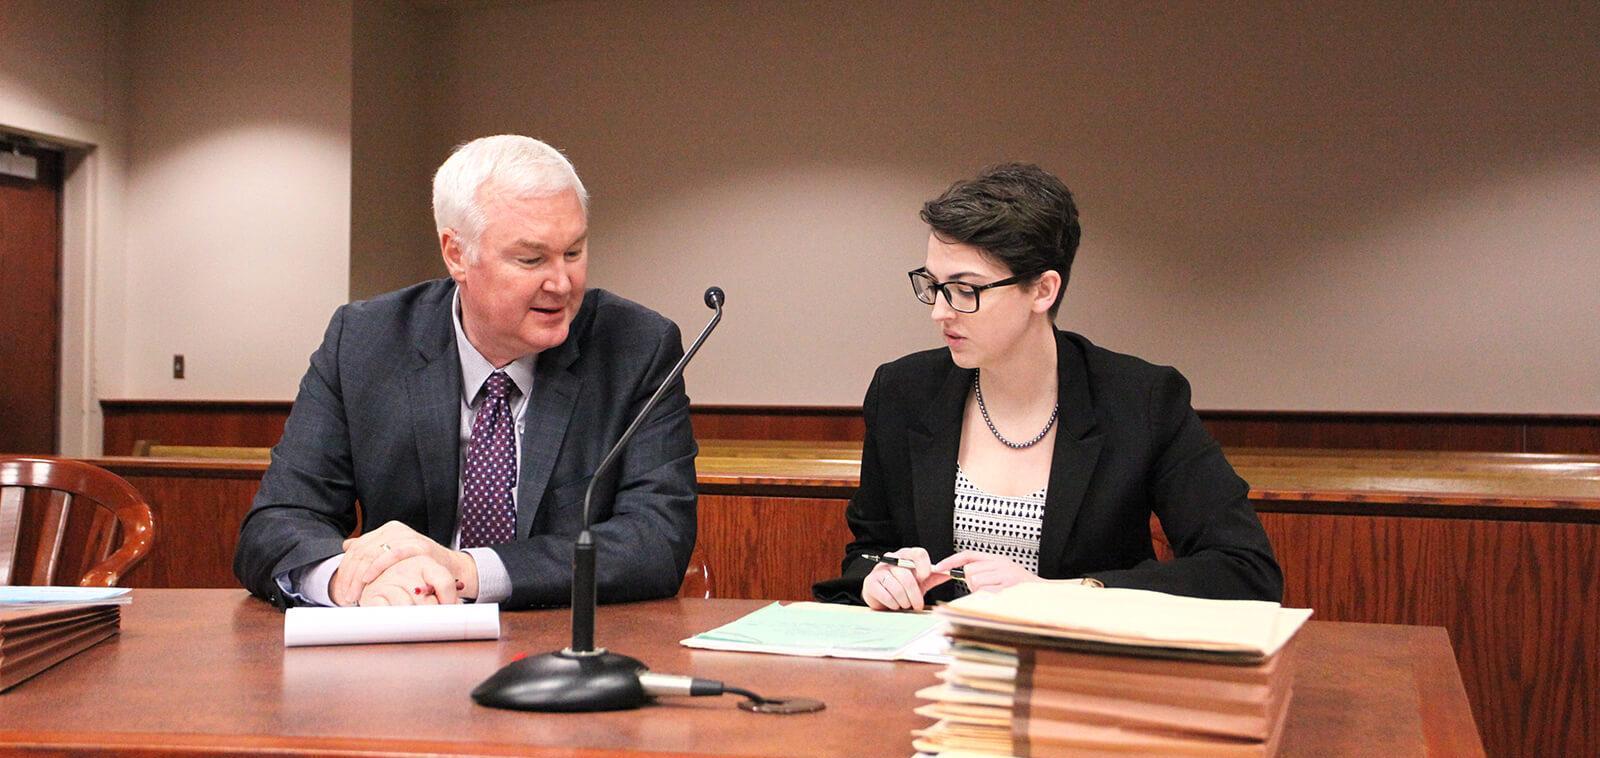 Two people talking at a court table